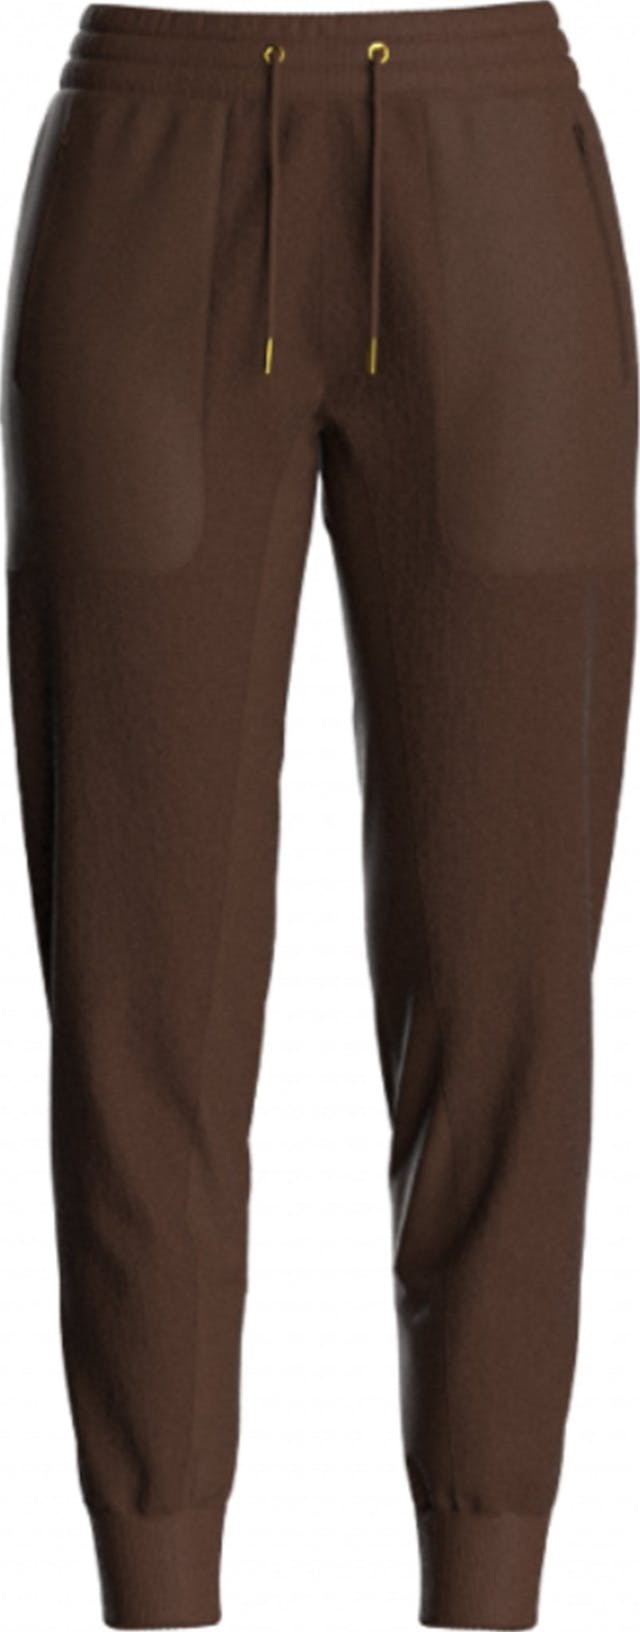 Product image for Fonna Pant - Women's